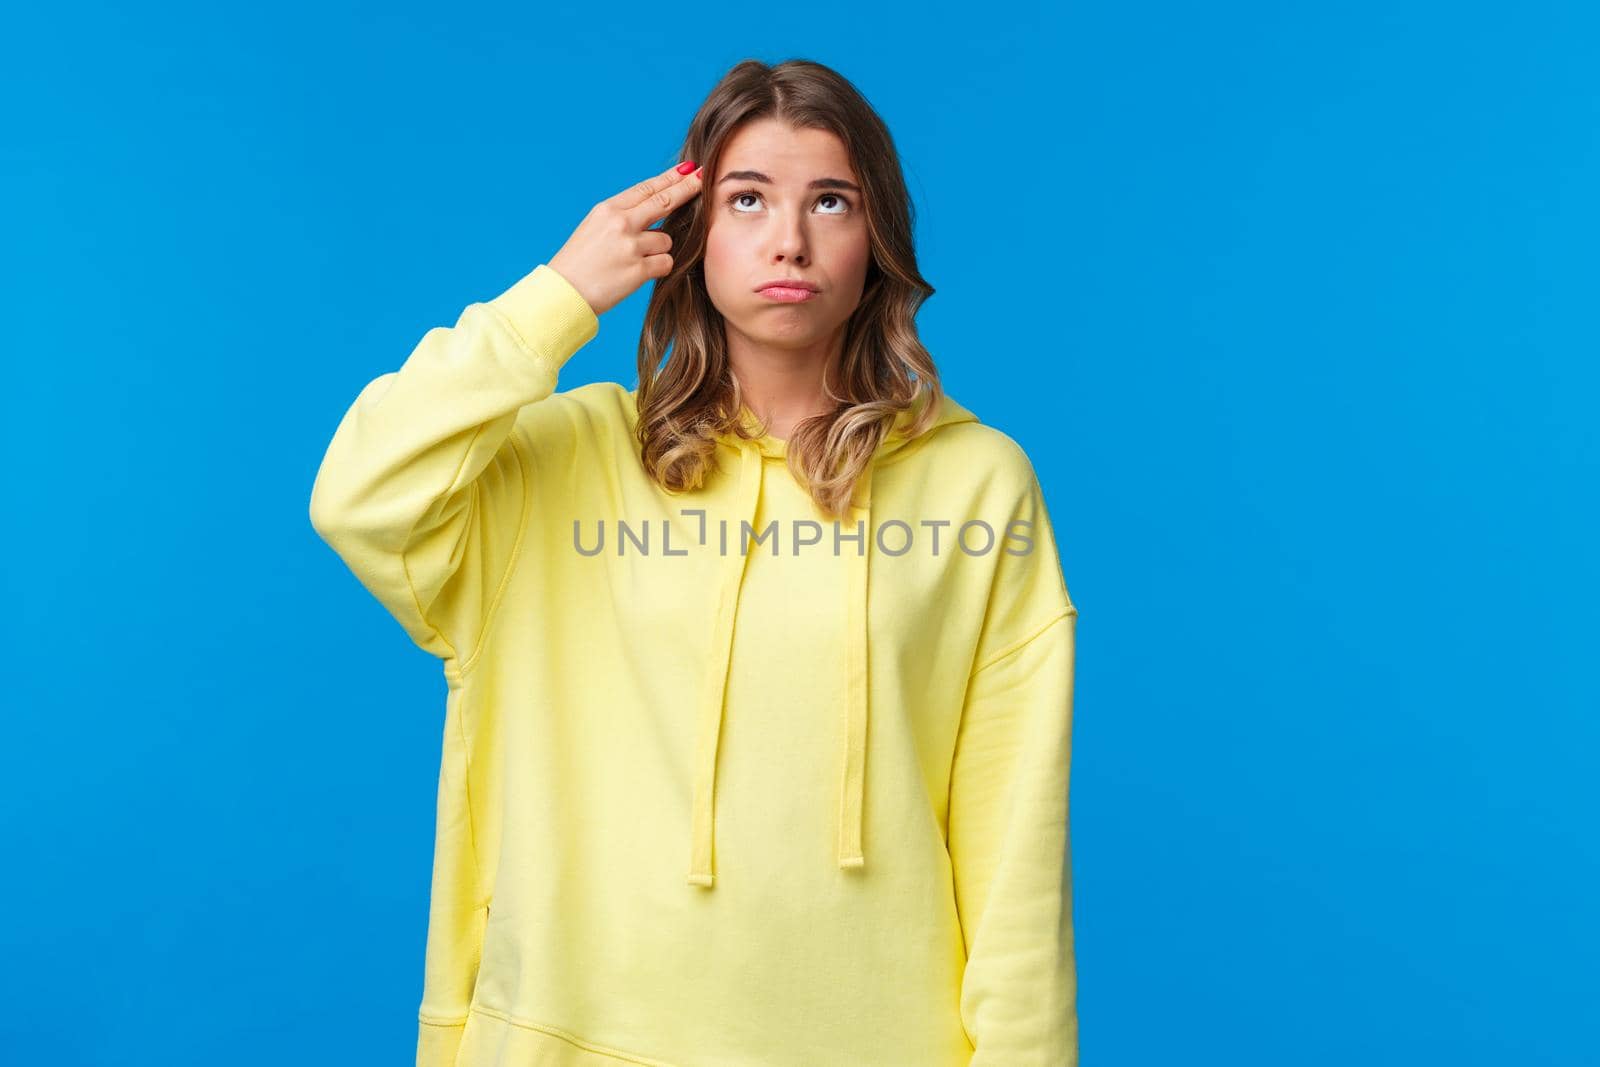 Gosh just kill me. Bored and pressured, stressed young blonde girl in yellow hoodie, make pistol gesture near head, shooting from gun and sighing as feel bothered and troubled, blue background.